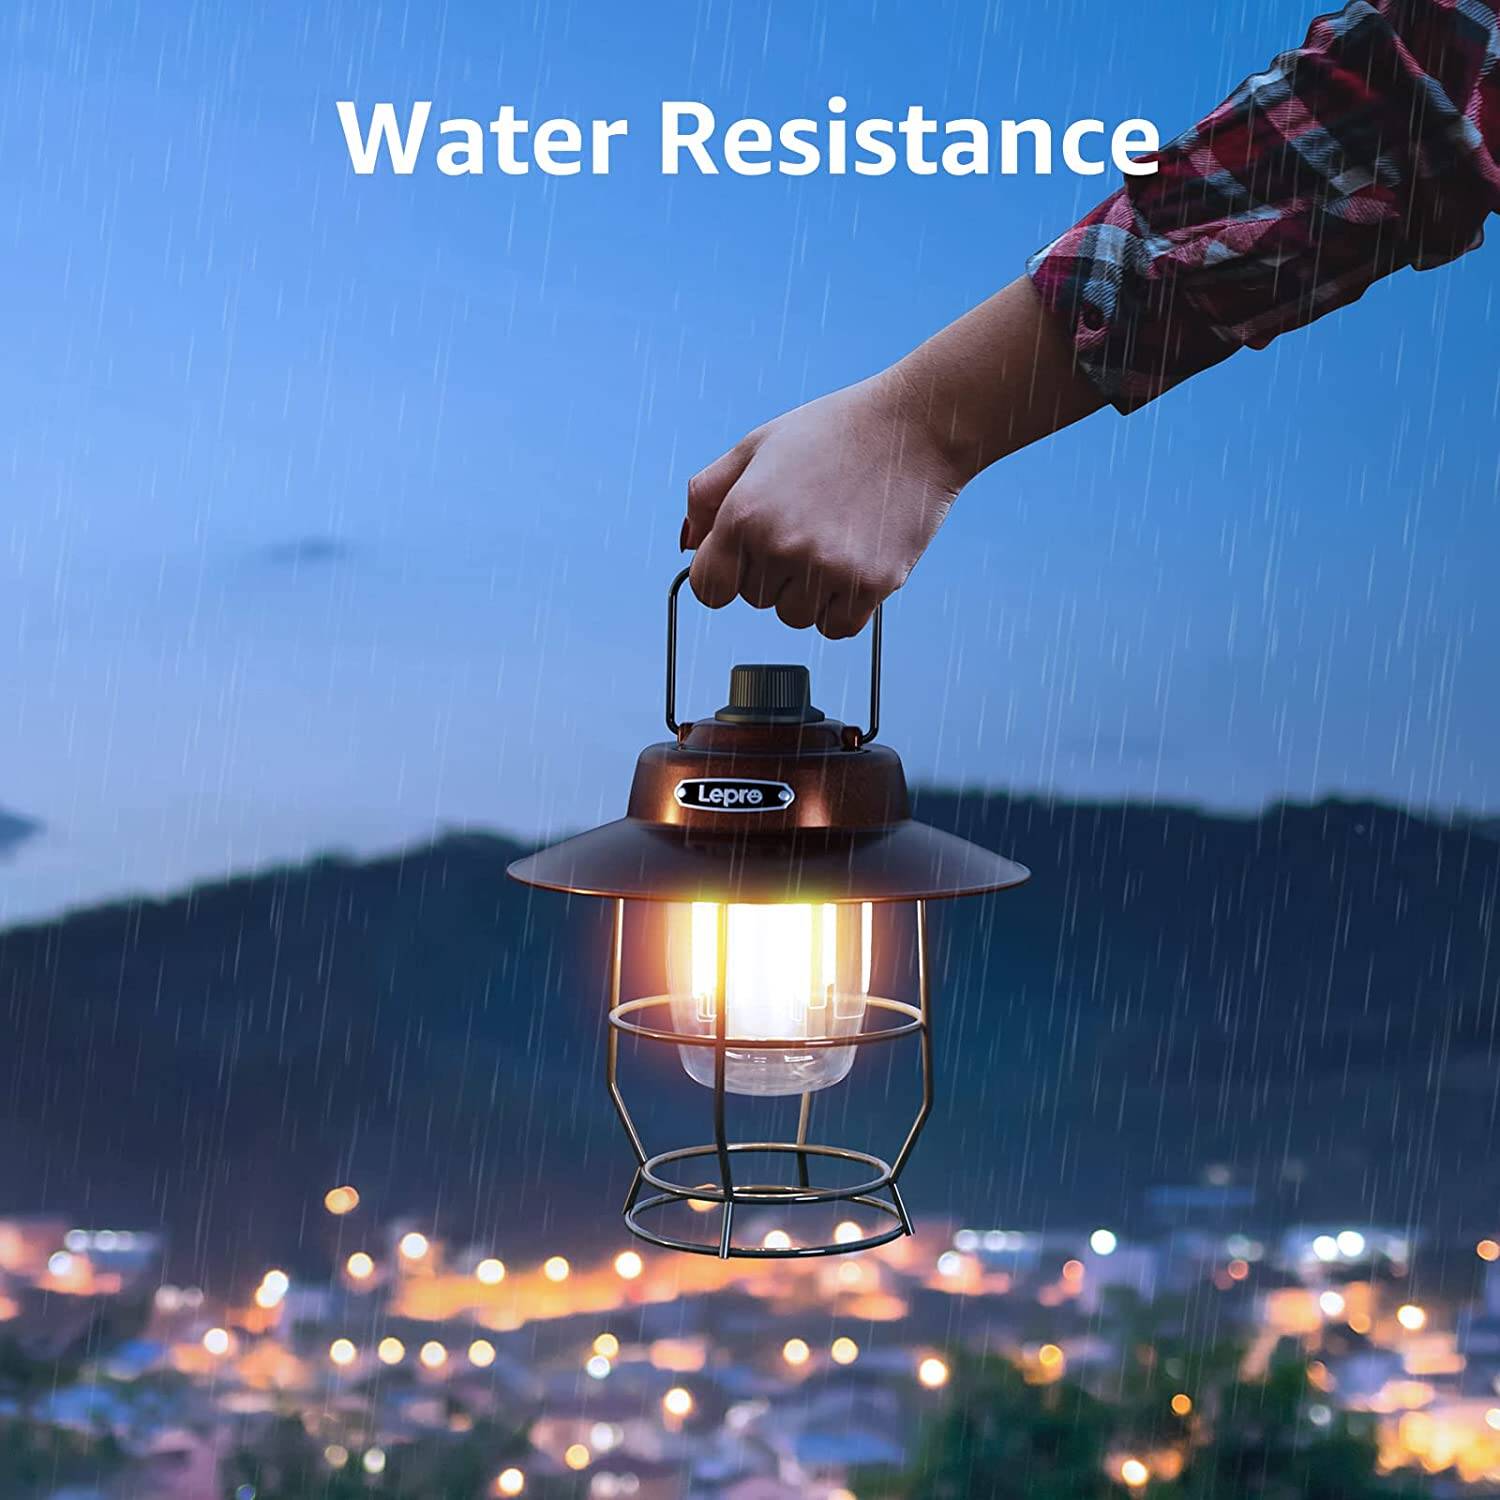 LED Vintage Lantern, Rechargeable Camping Railroad Lantern, Retro Style,  Classic Tabletop Lantern Decor with Dimmable Control, Portable Outdoor